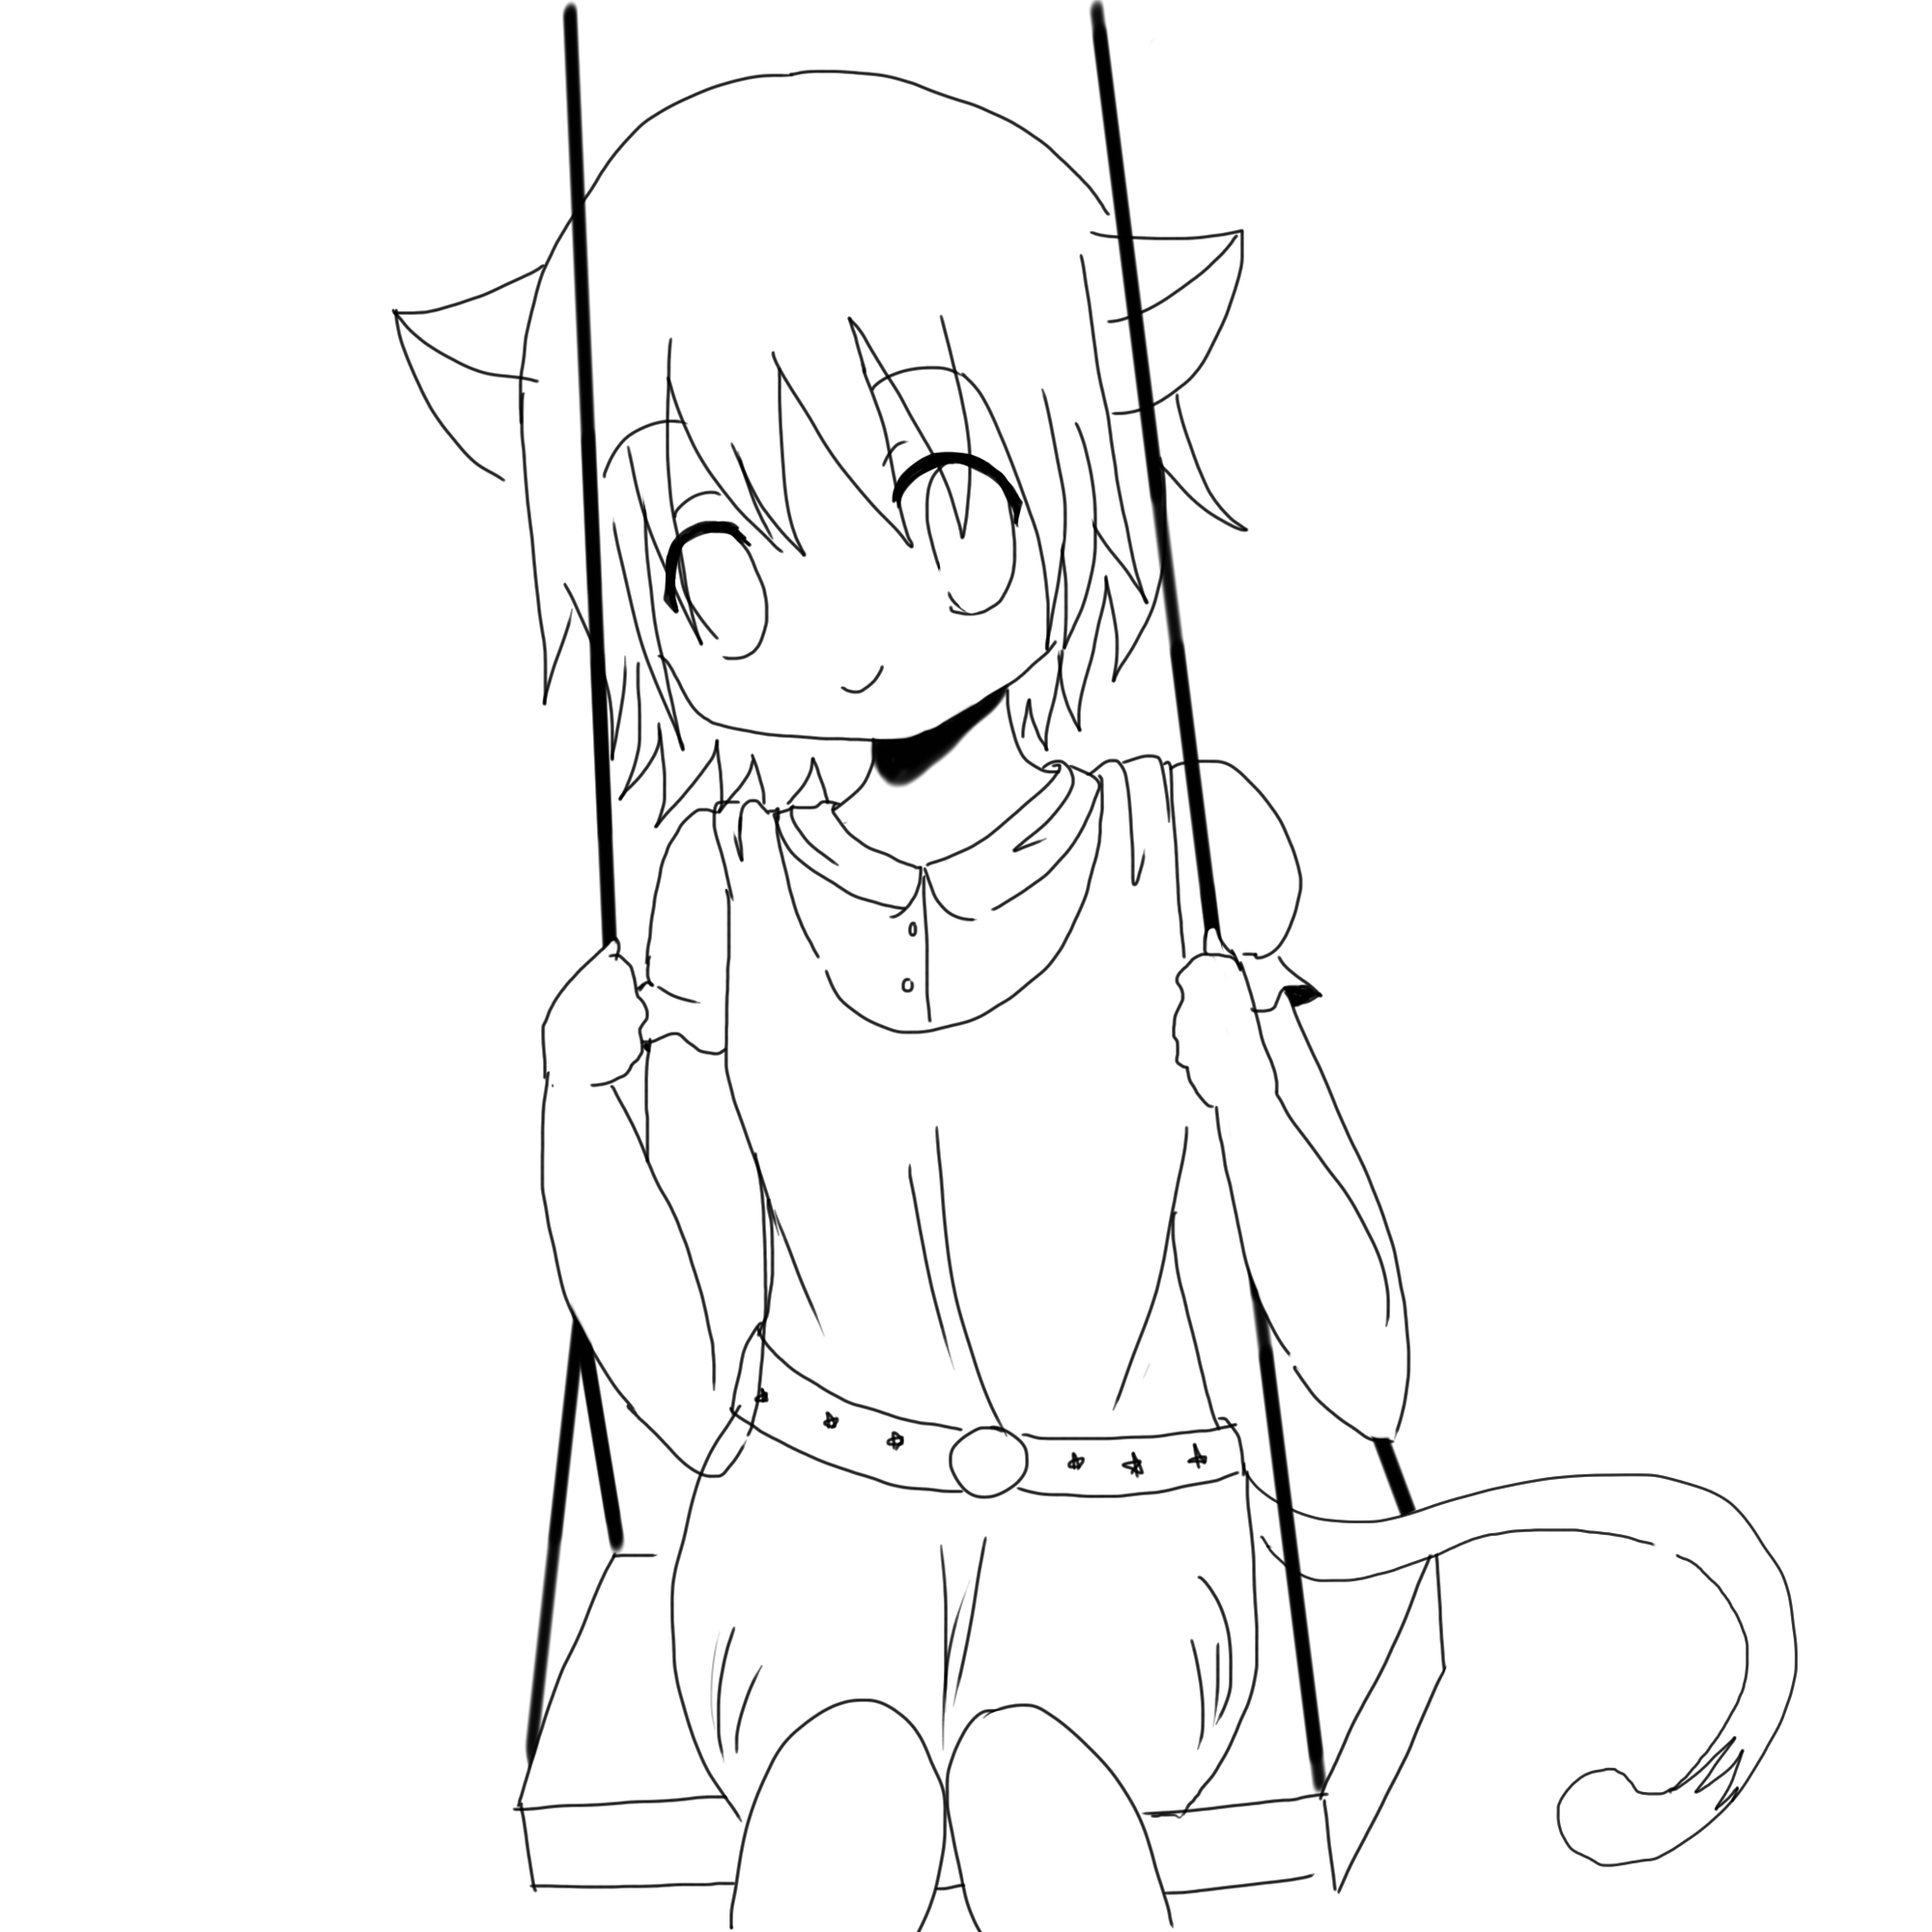 41+ Coloring Pages Of Cute Girls Images